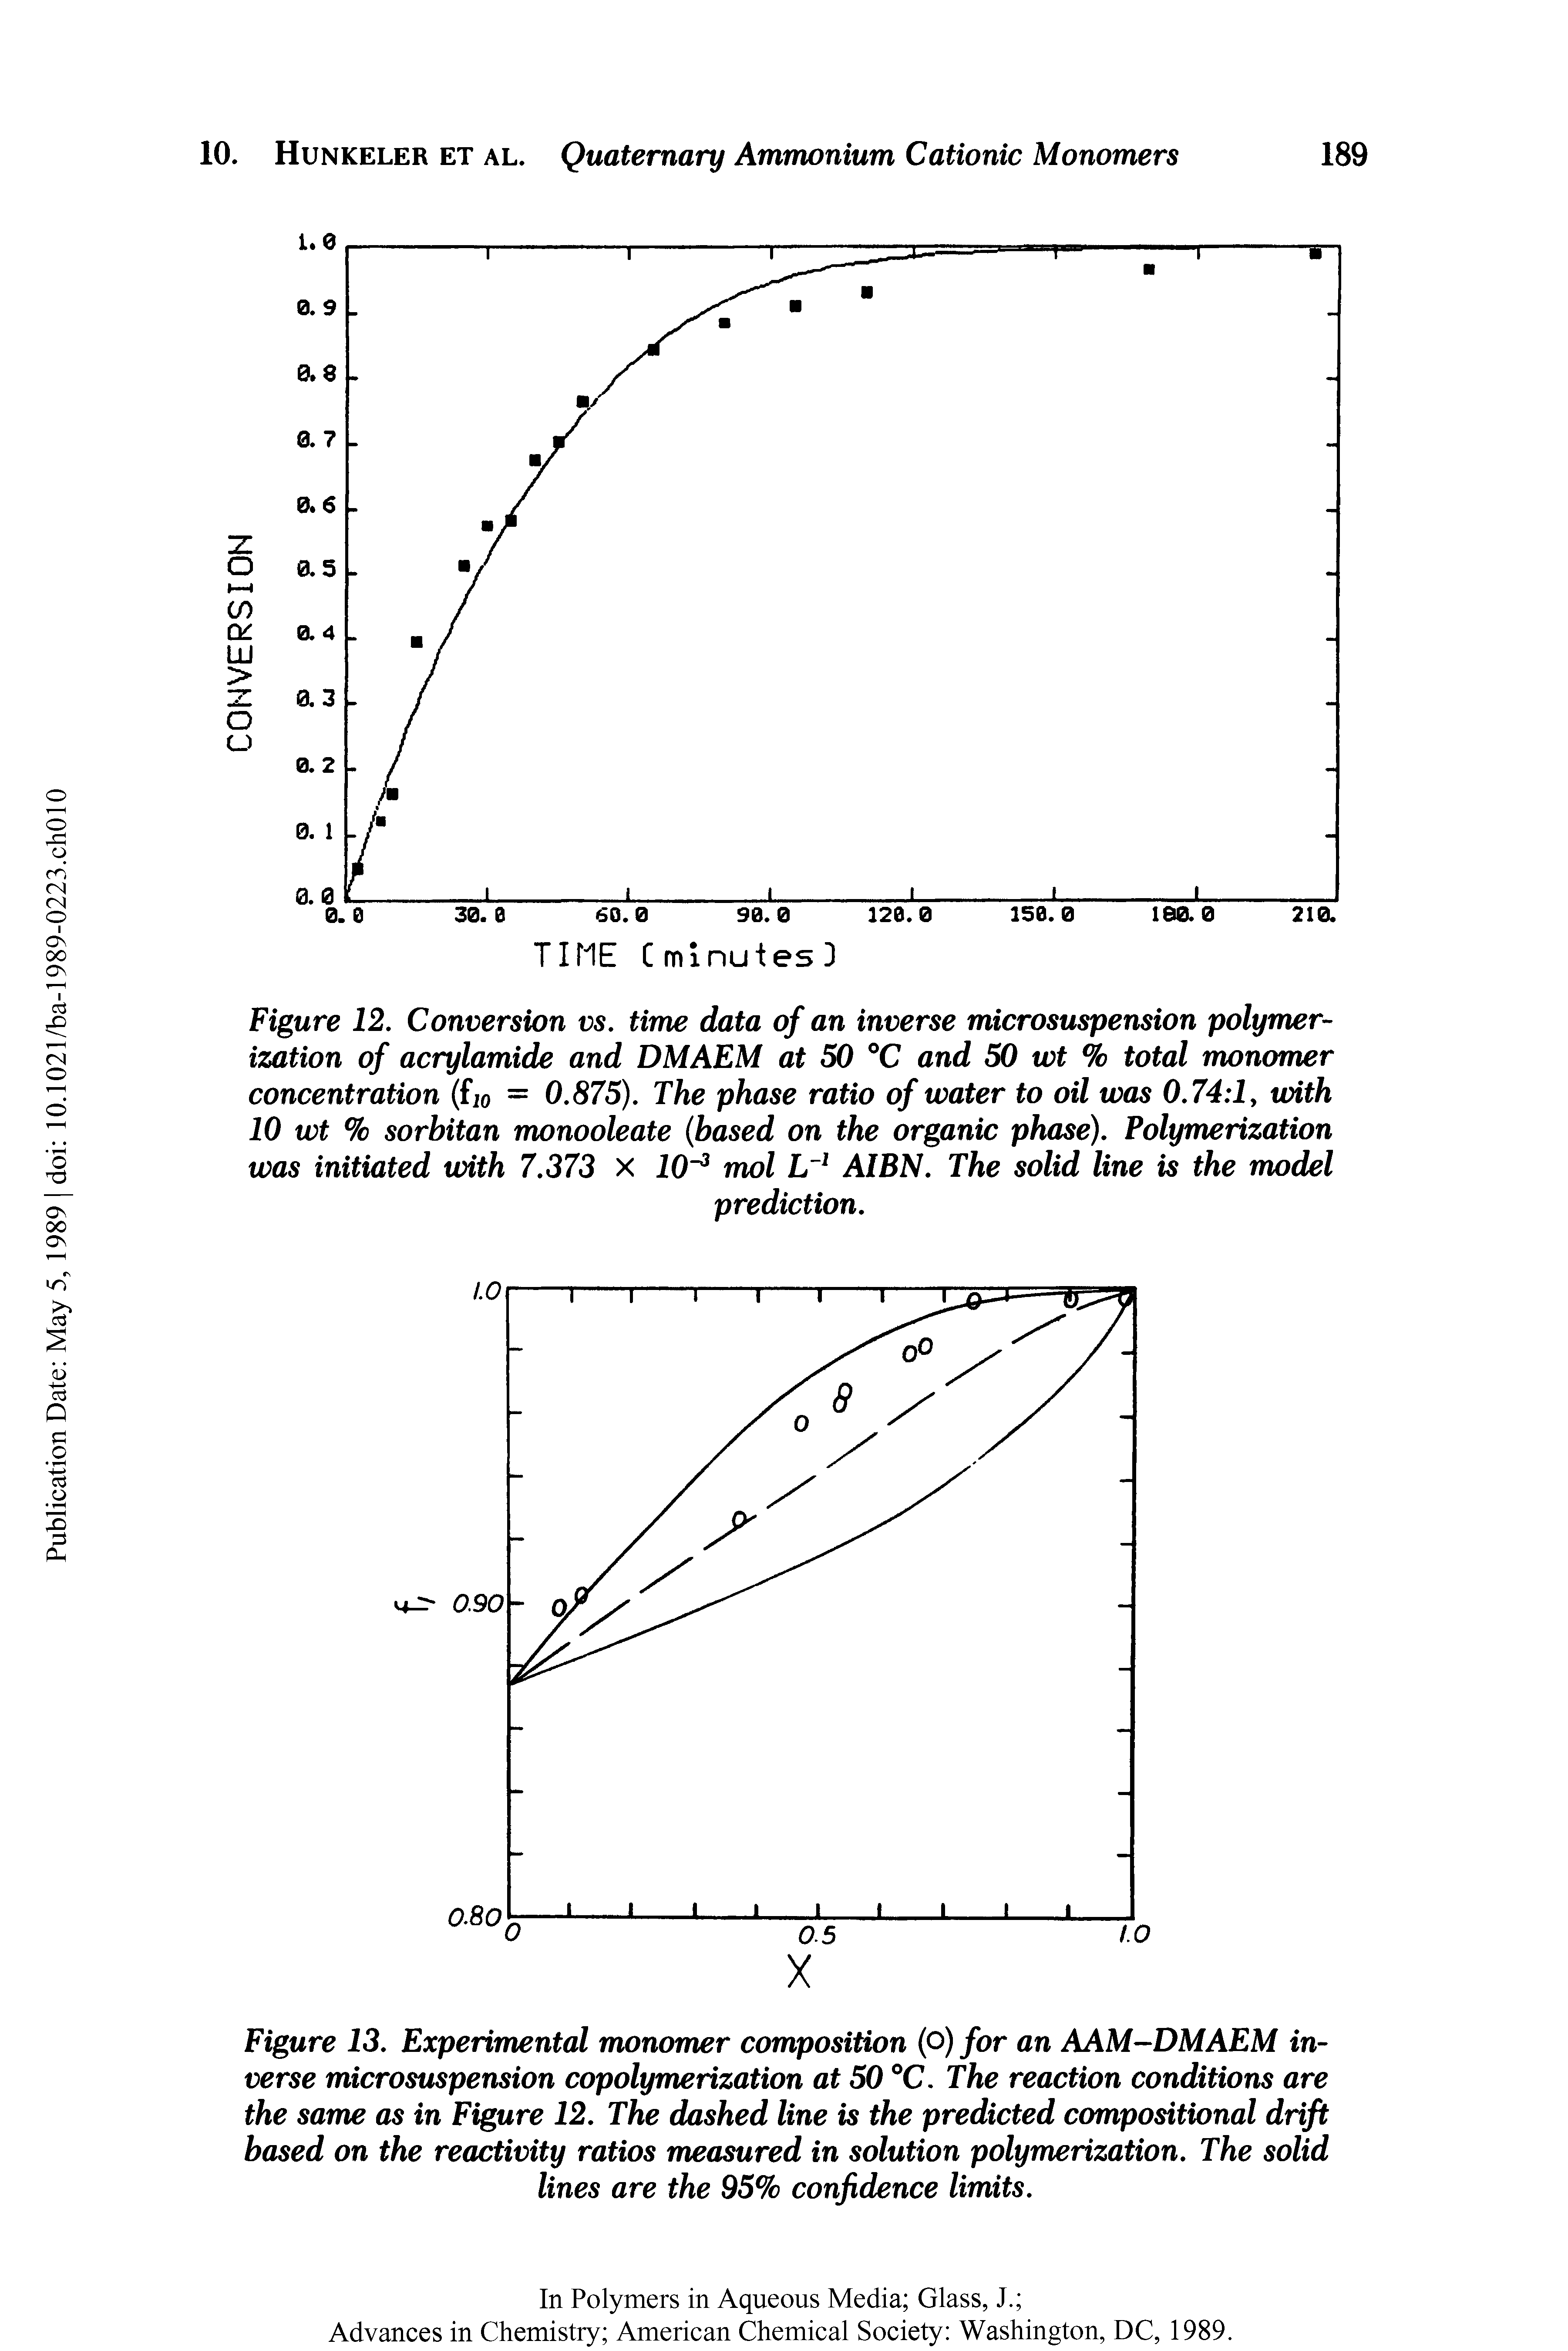 Figure 13. Experimental monomer composition (o) for an AAM-DMAEM inverse microsuspension copolymerization at 50 C. The reaction conditions are the same as in Figure 12. The dashed line is the predicted compositional drift based on the reactivity ratios measured in solution polymerization. The solid lines are the 95% confidence limits.